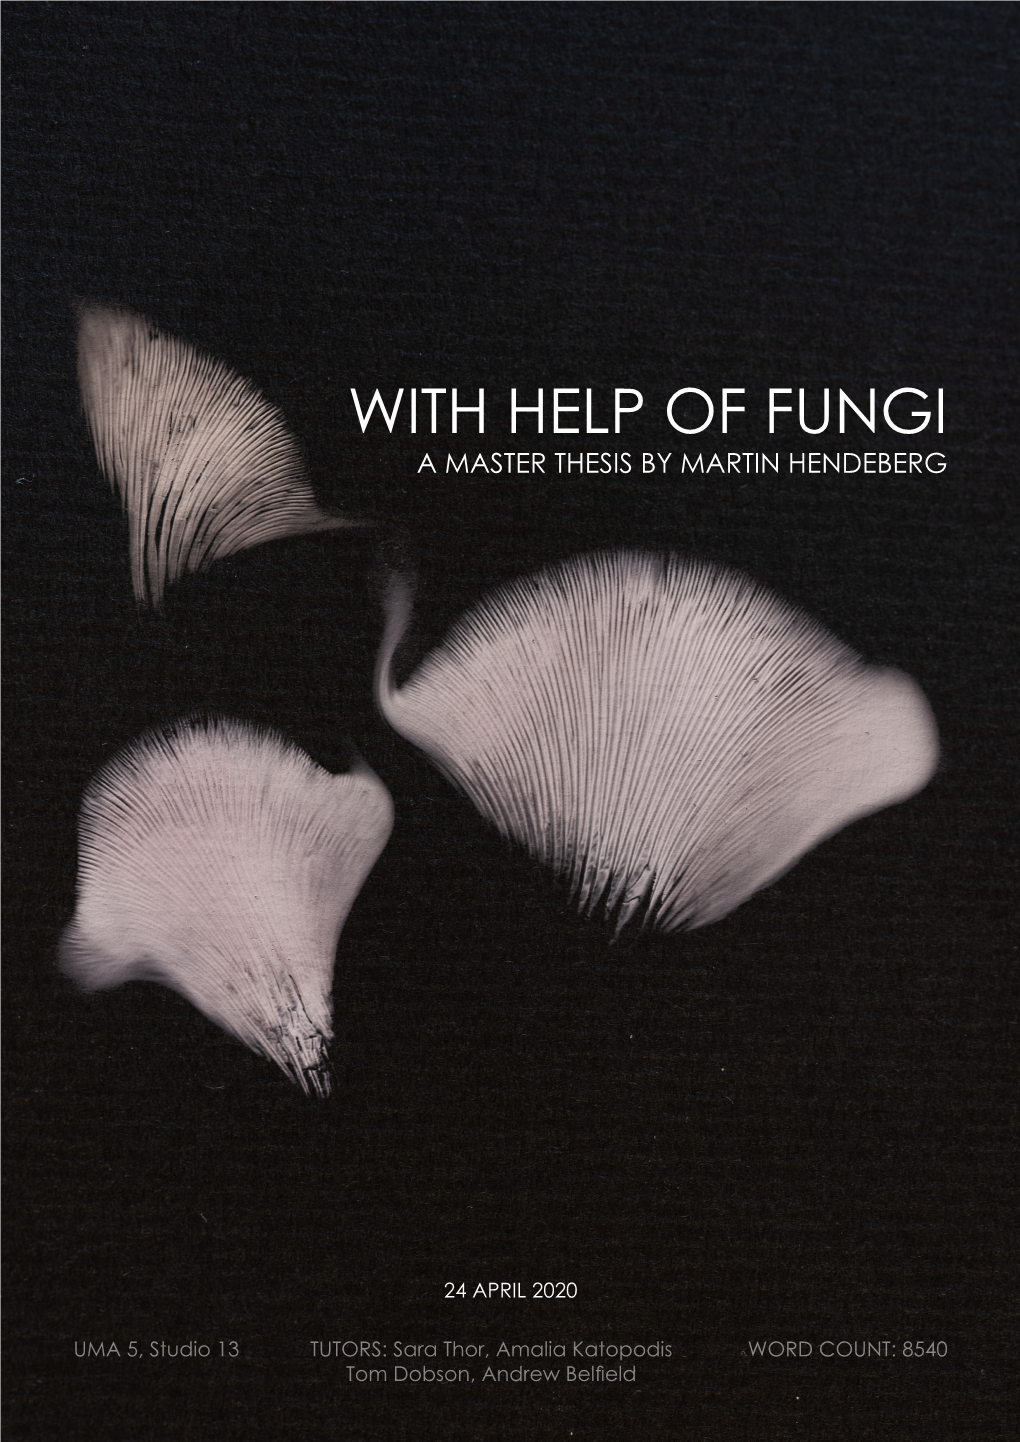 With Help of Fungi a Master Thesis by Martin Hendeberg